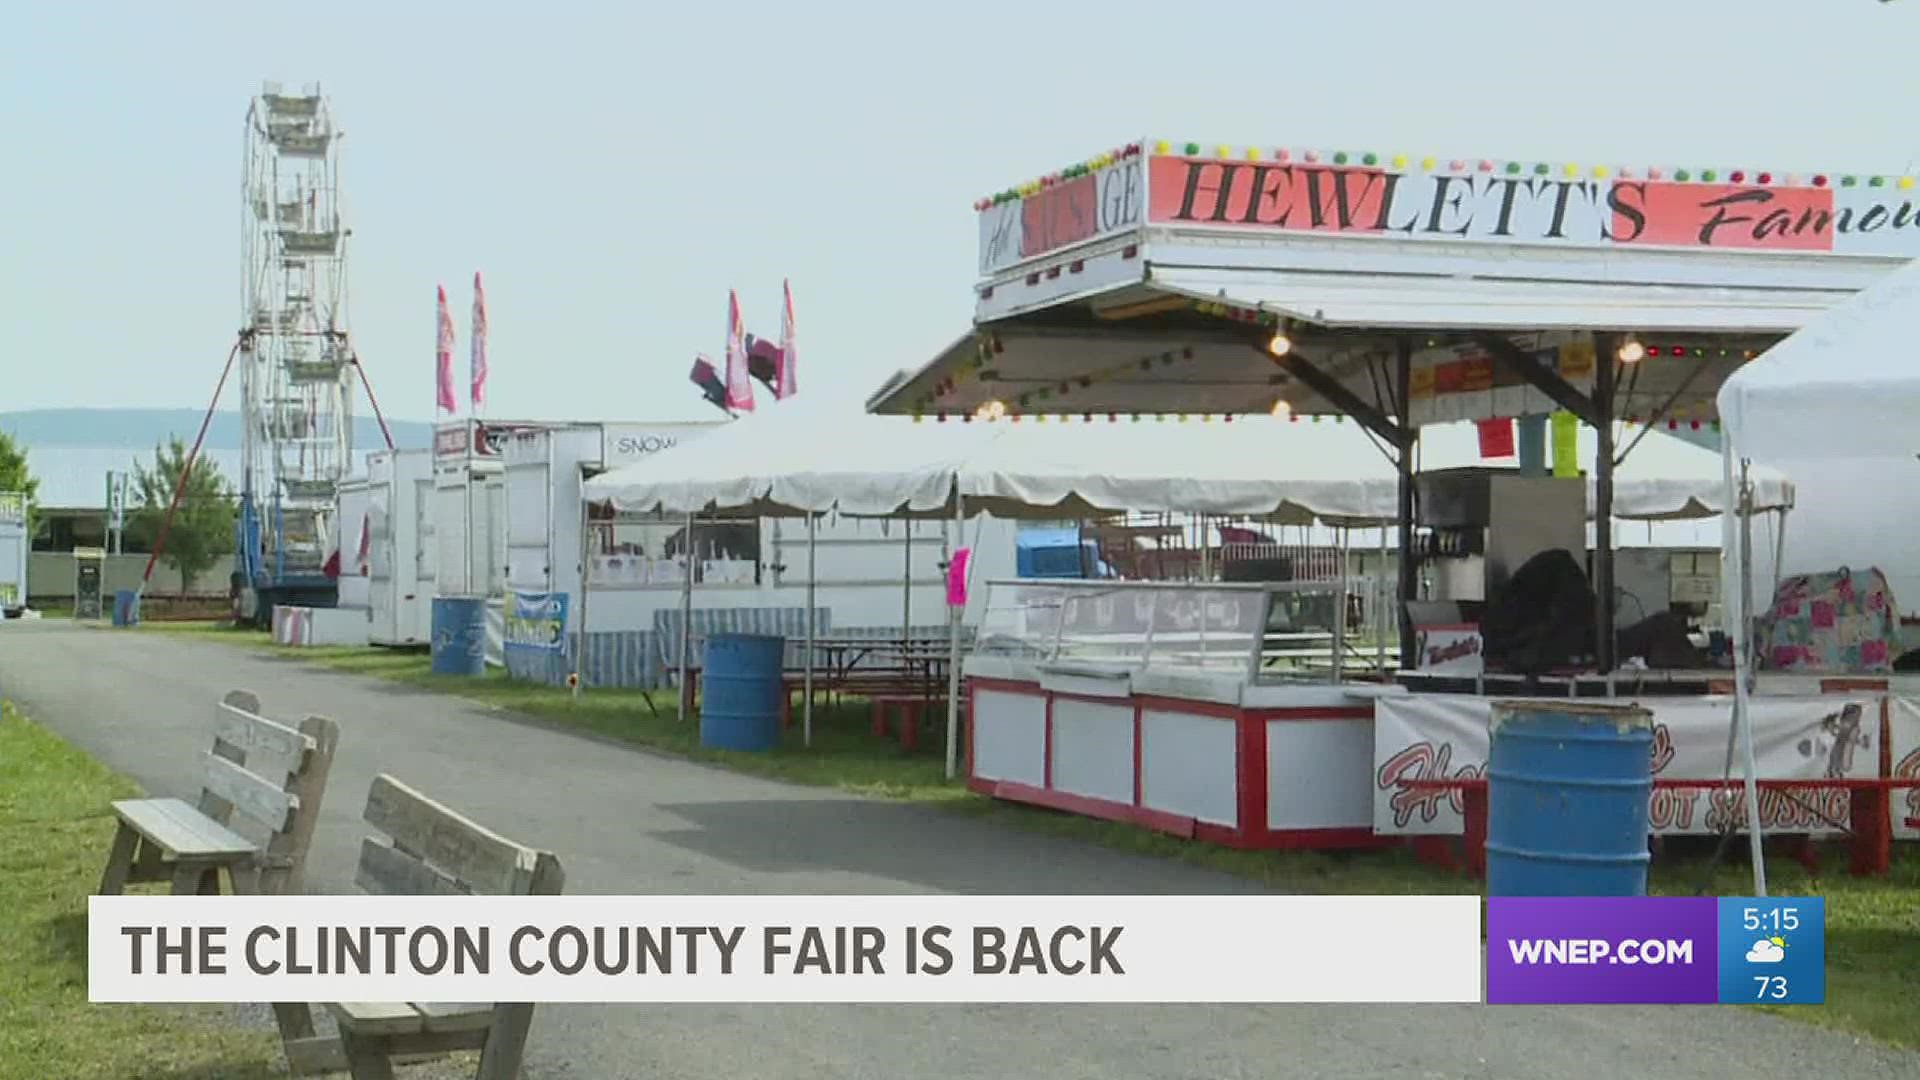 The 48th Clinton County Fair is taking place this week after it was canceled last year.